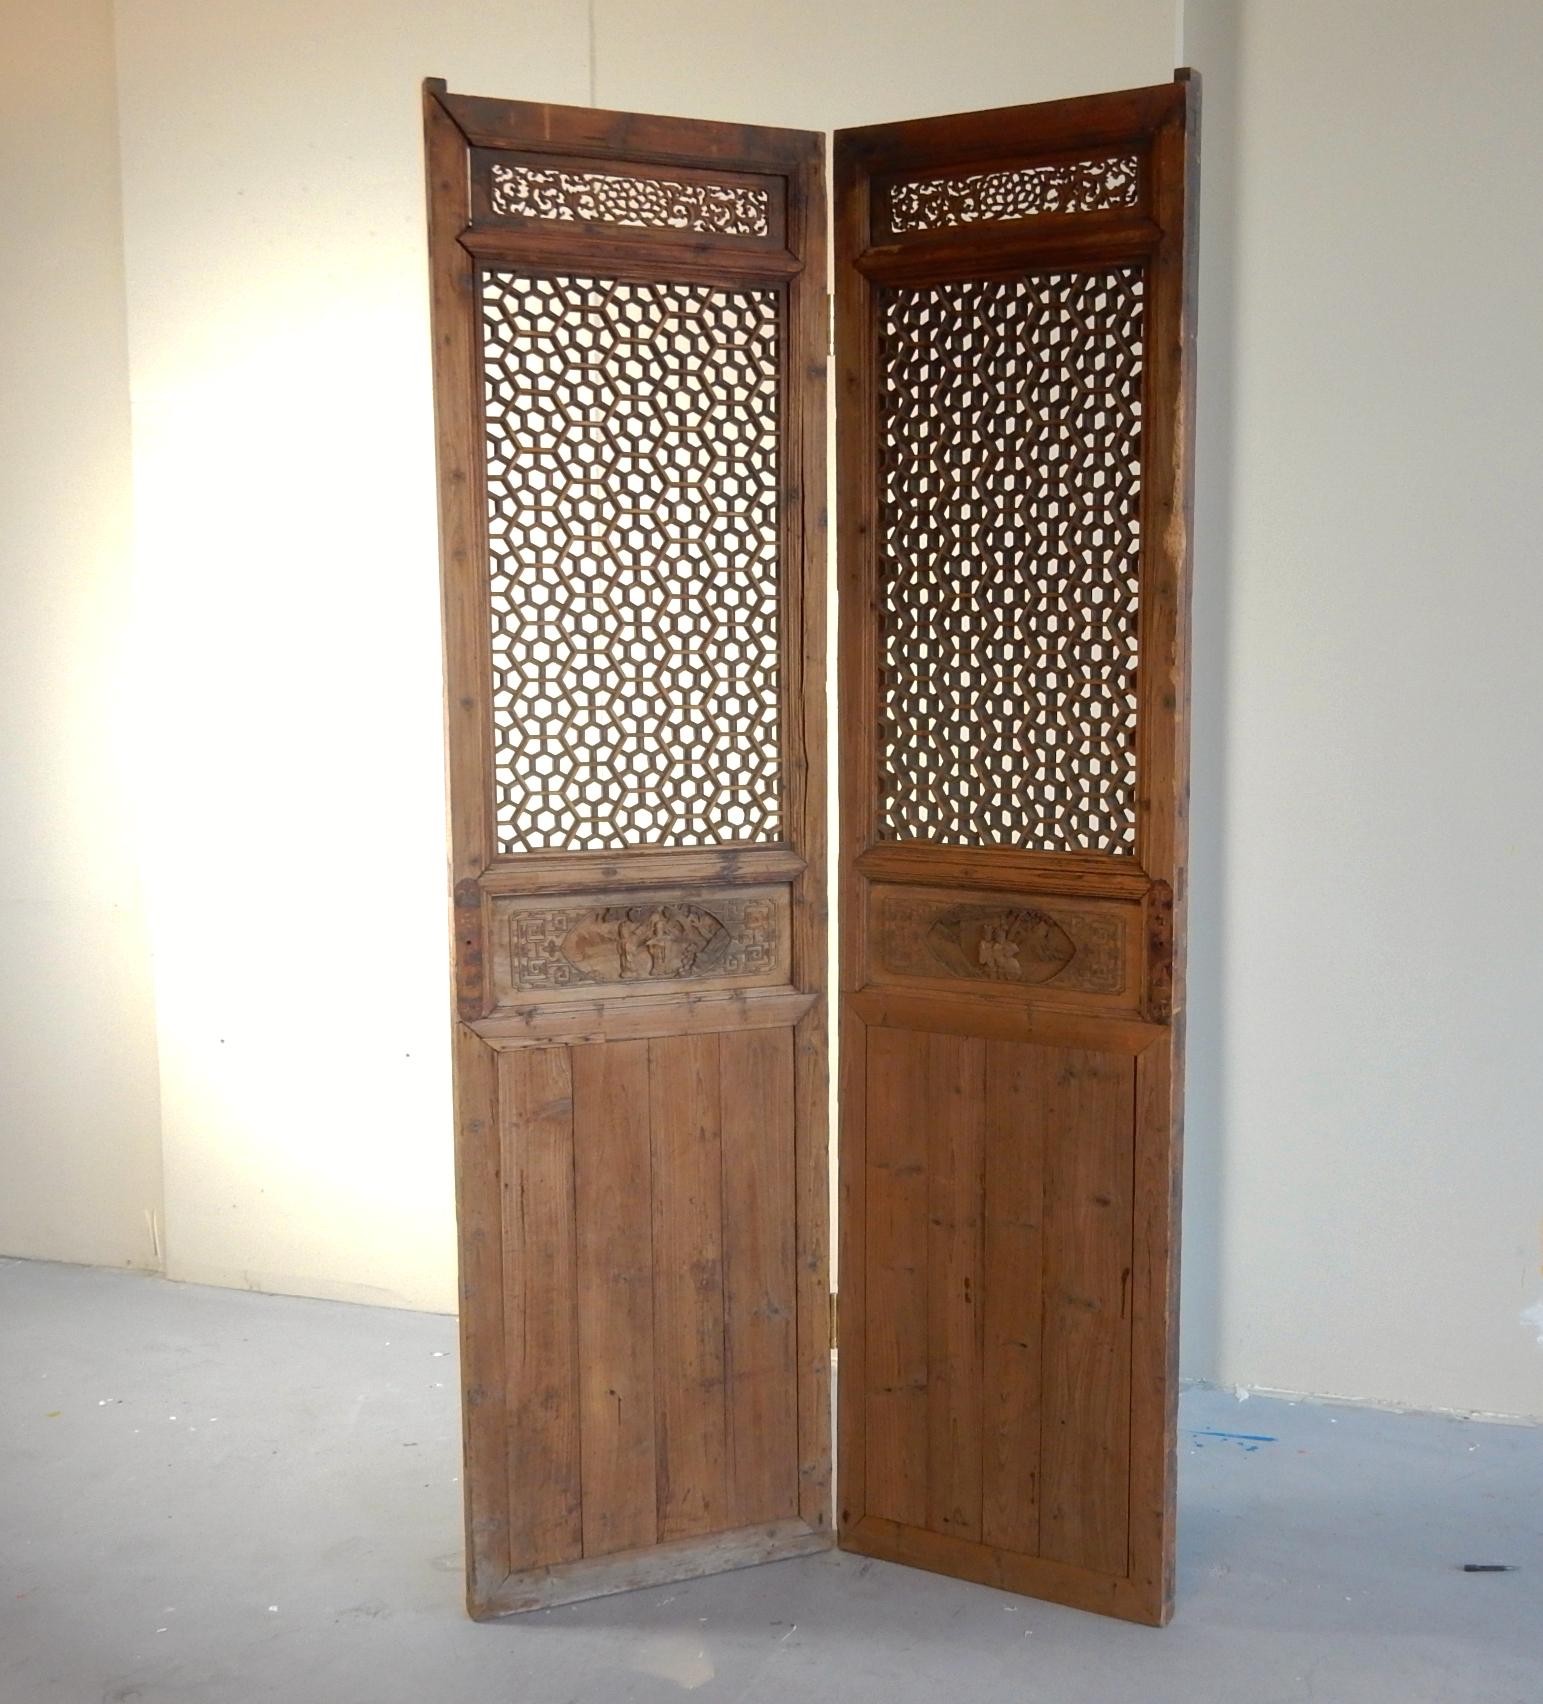 Antique Chinese Lattice Entry Doors, Room Divider Screen 2